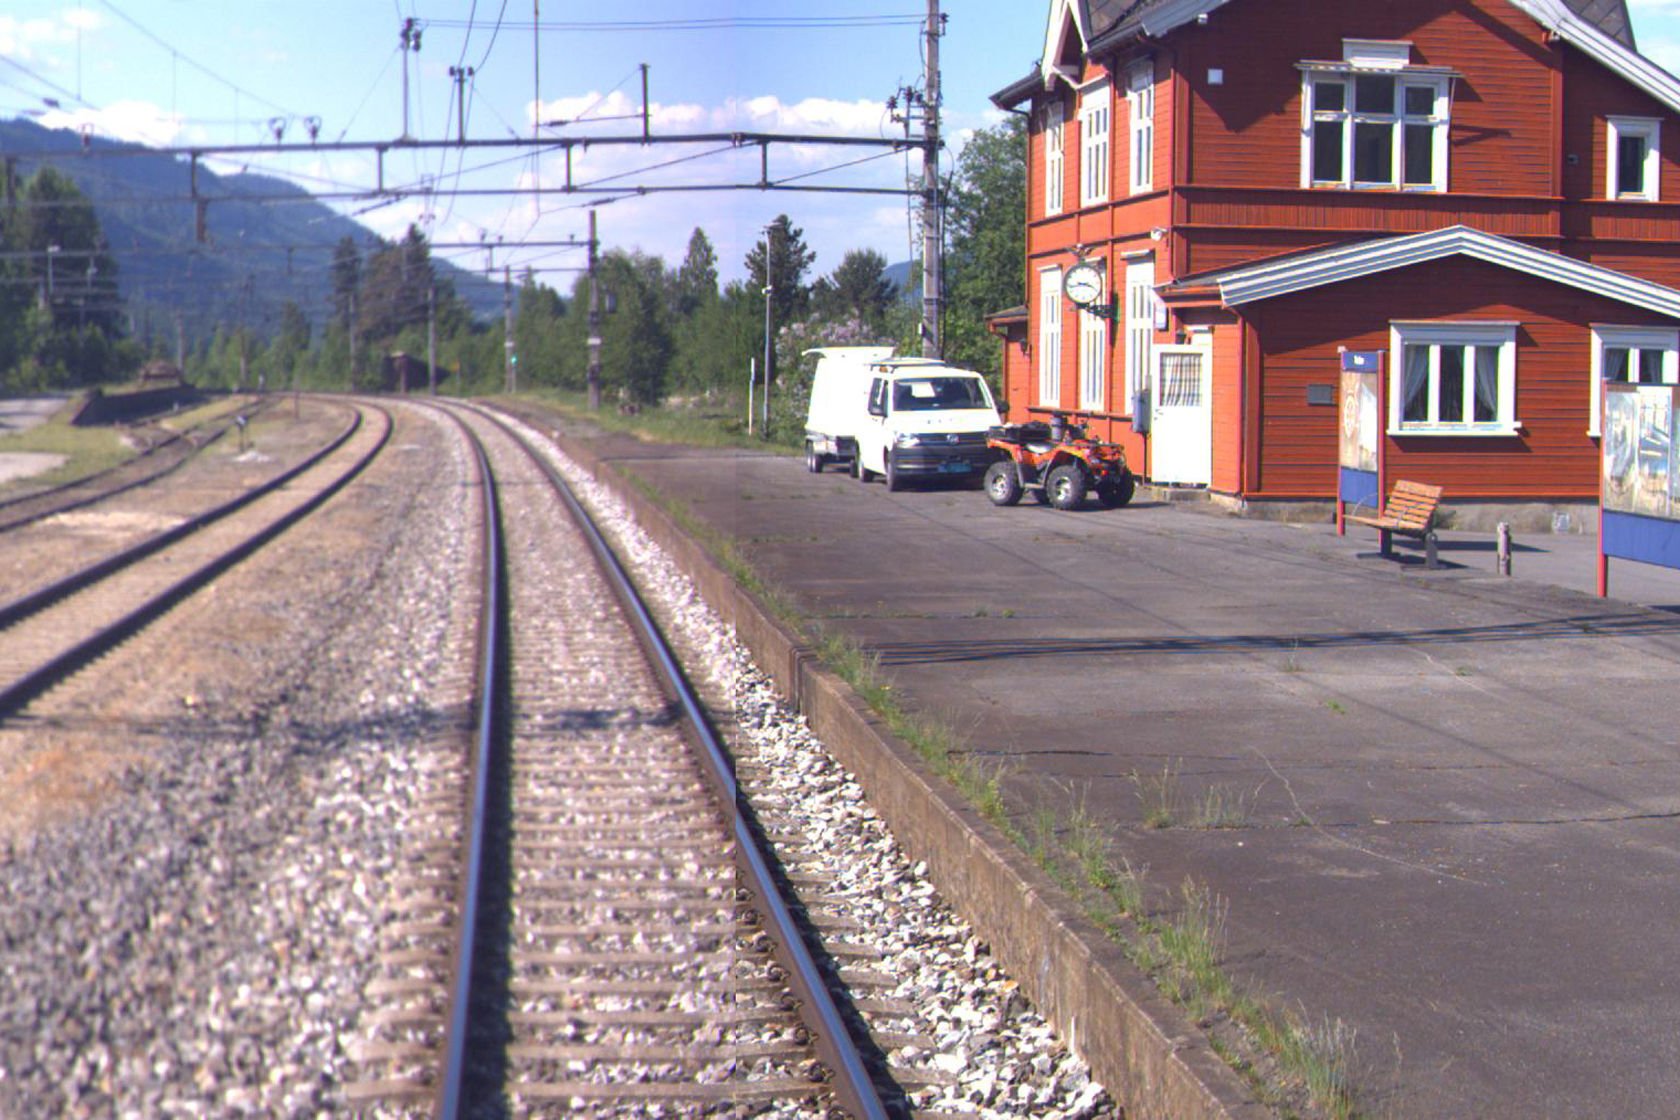 Tracks and station building at Tretten station